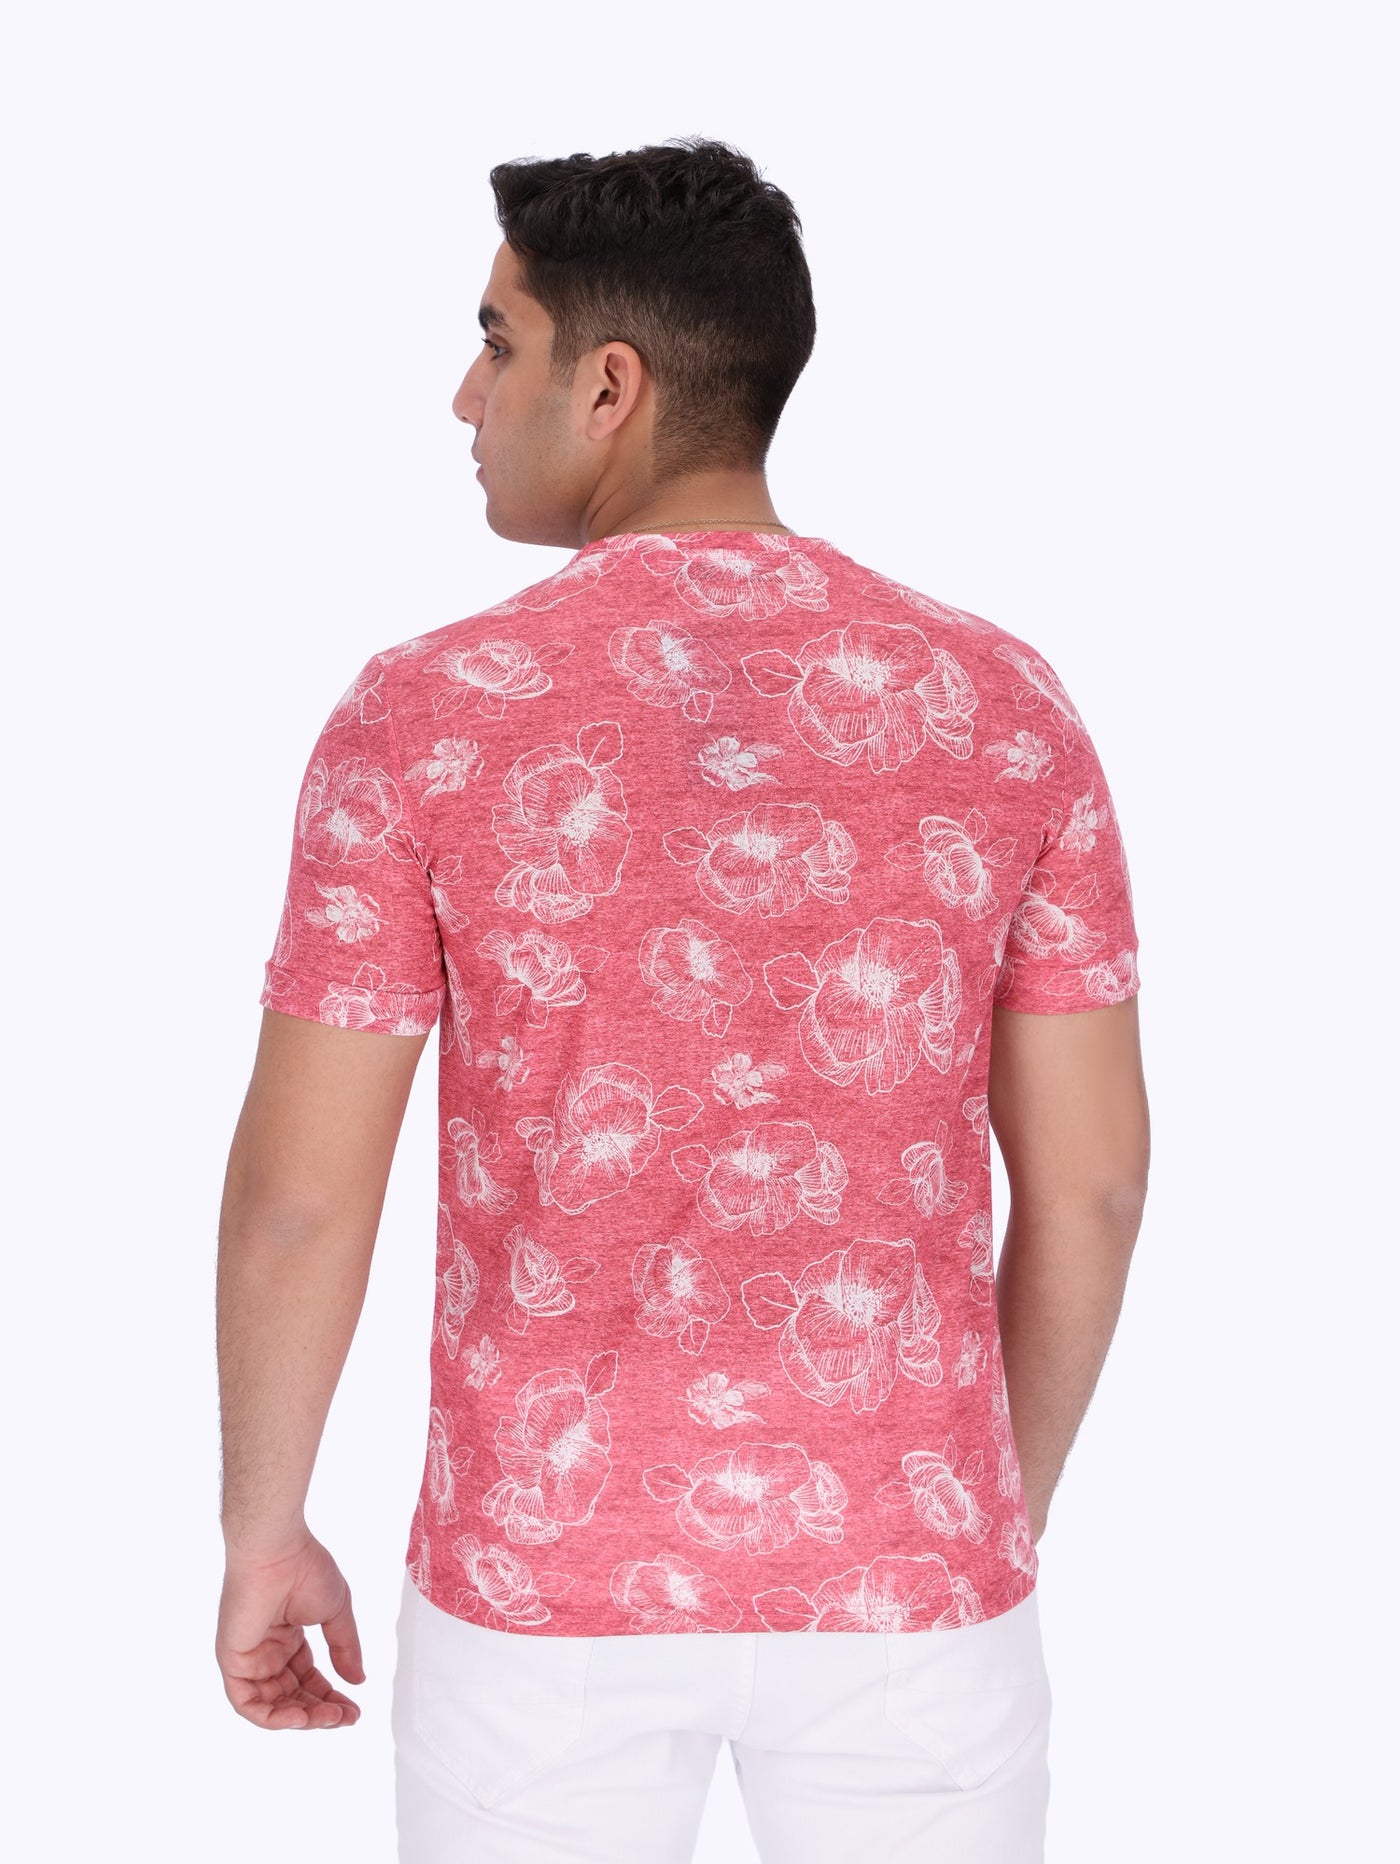 OR Men's All Over Print T-Shirt